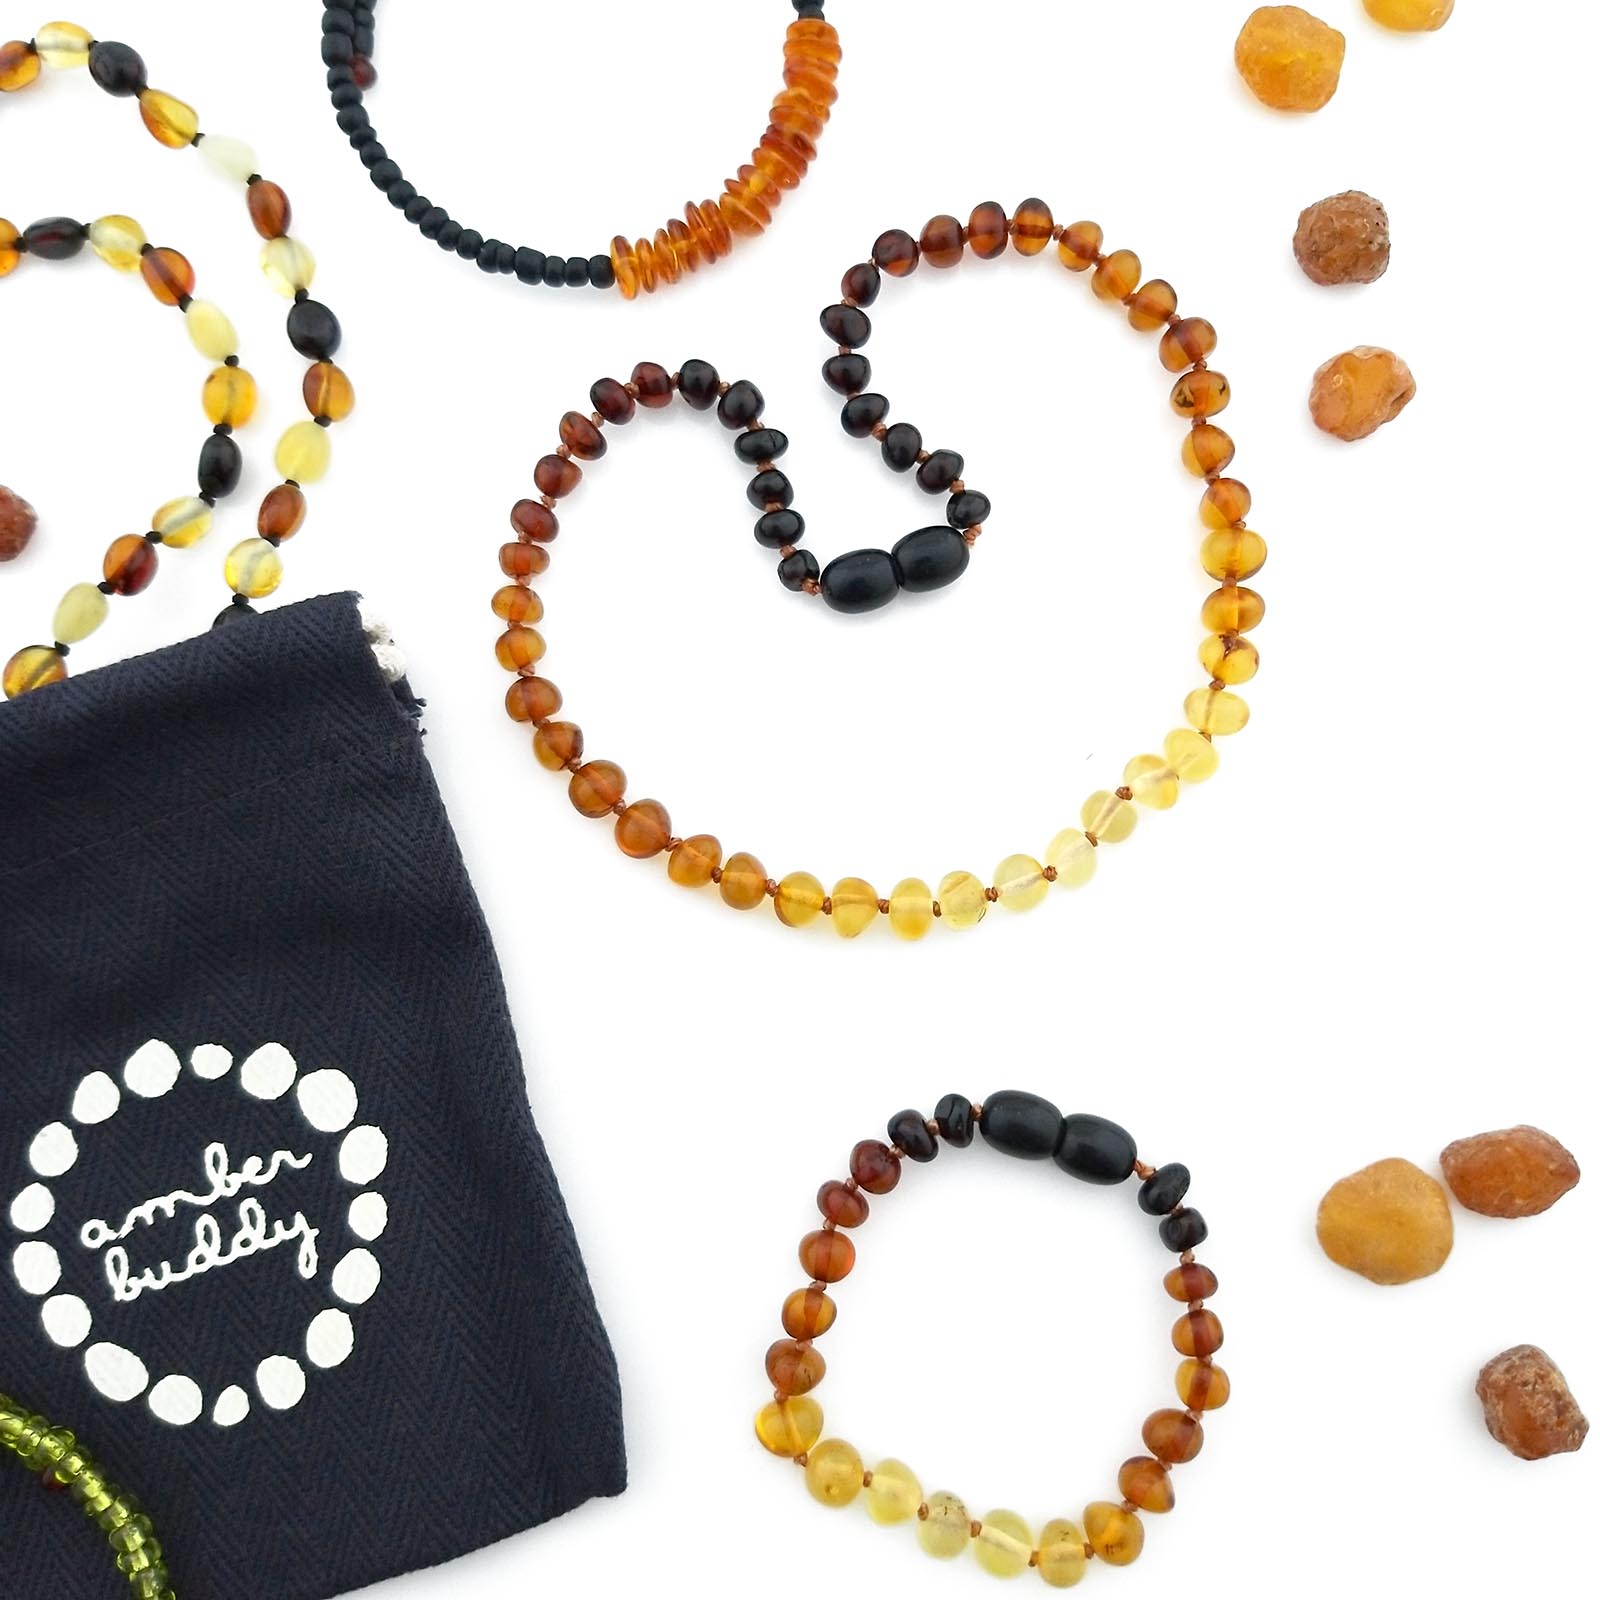 Amber Teething Jewellery: An Overview